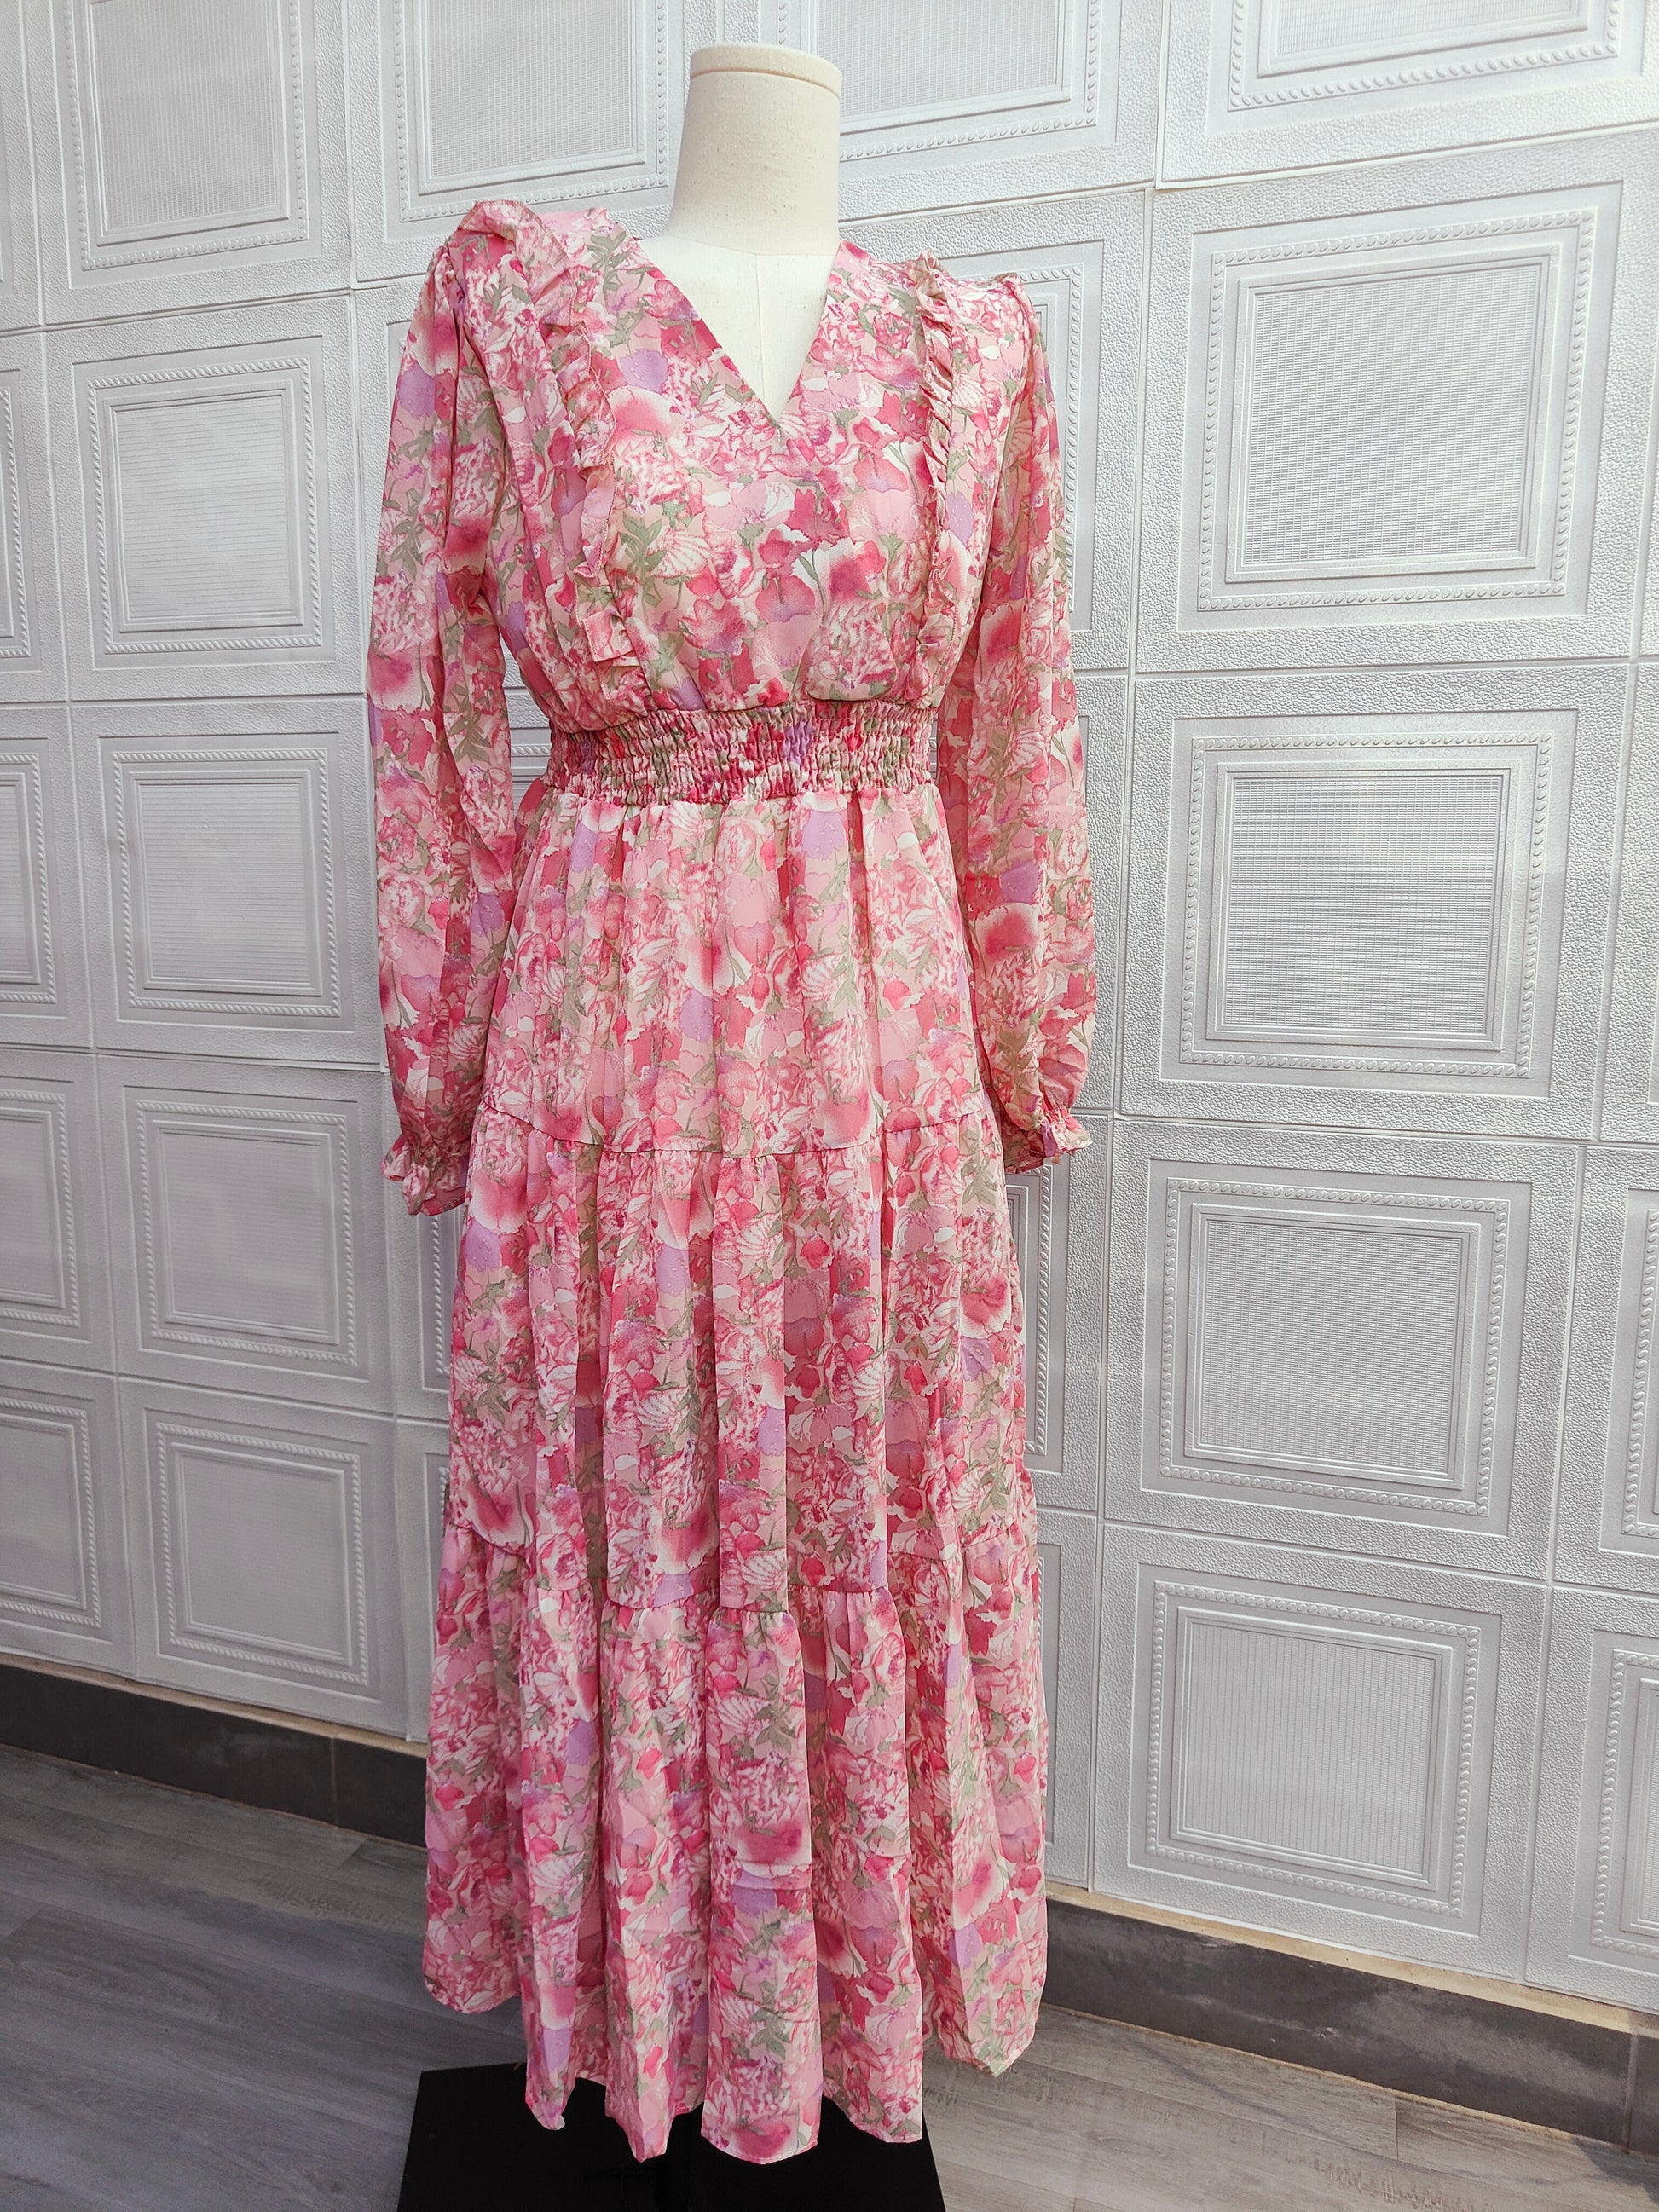 Make a statement in the new Floral Summer Dress by Hikmah Boutique. This Summer Dress features a feminine abstract floral print, puff sleeves with elasticated cuffs, and swish ready voluminous skirt. Perfect for cocktail events or any evening soirees! This party dress is made from the softest yet premium fabric. 